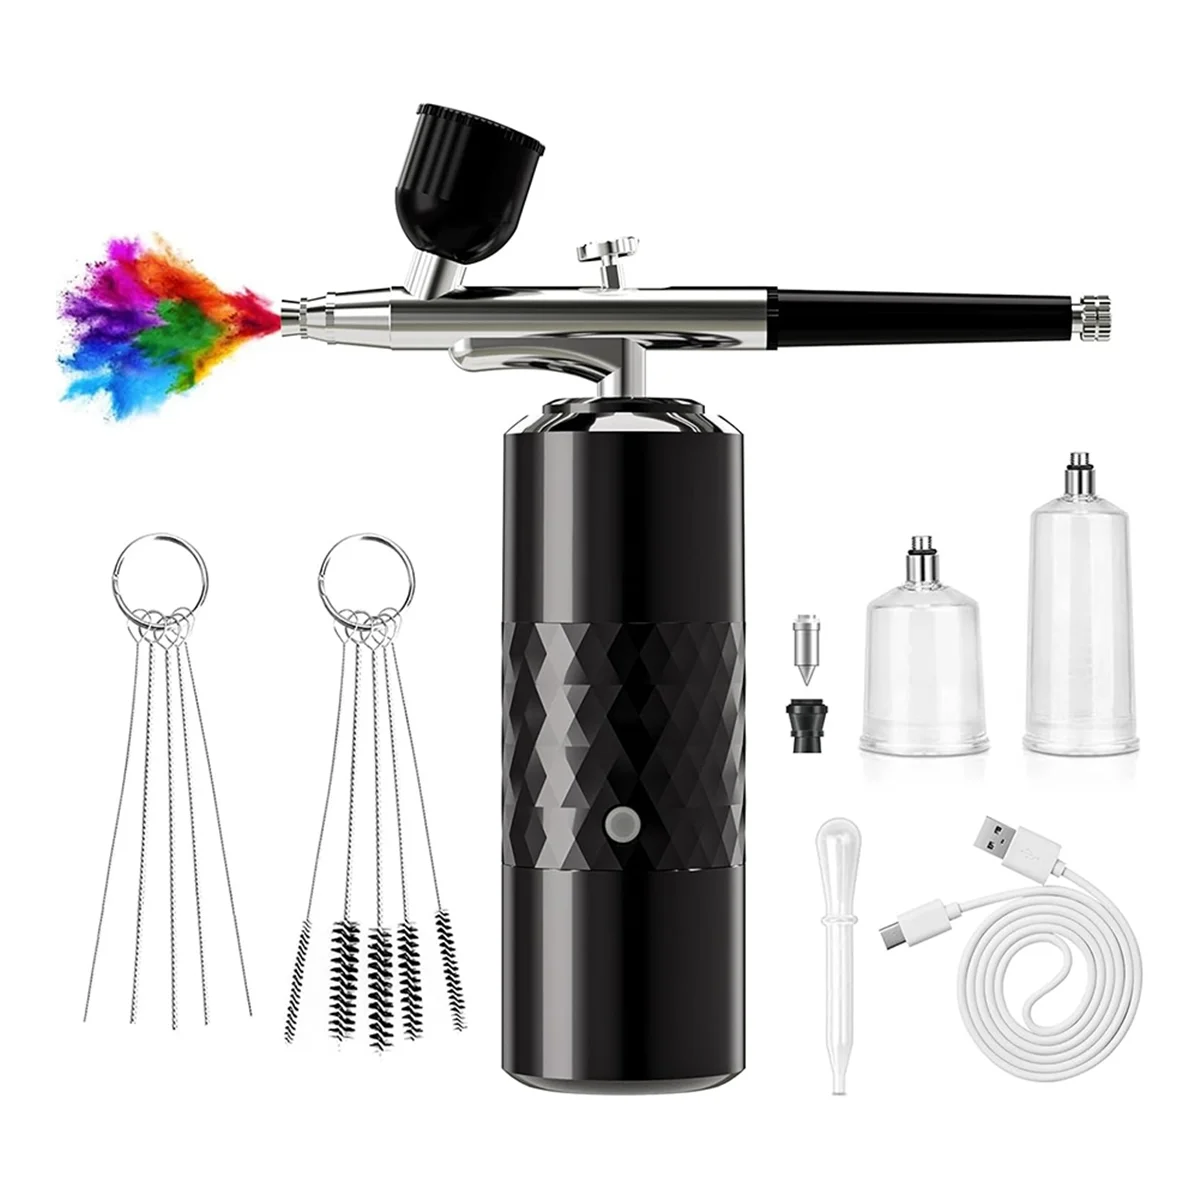 

Airbrush Kit Rechargeable Cordless Airbrush Compressor Portable Handheld Airbrush Airbrush for Model Painting